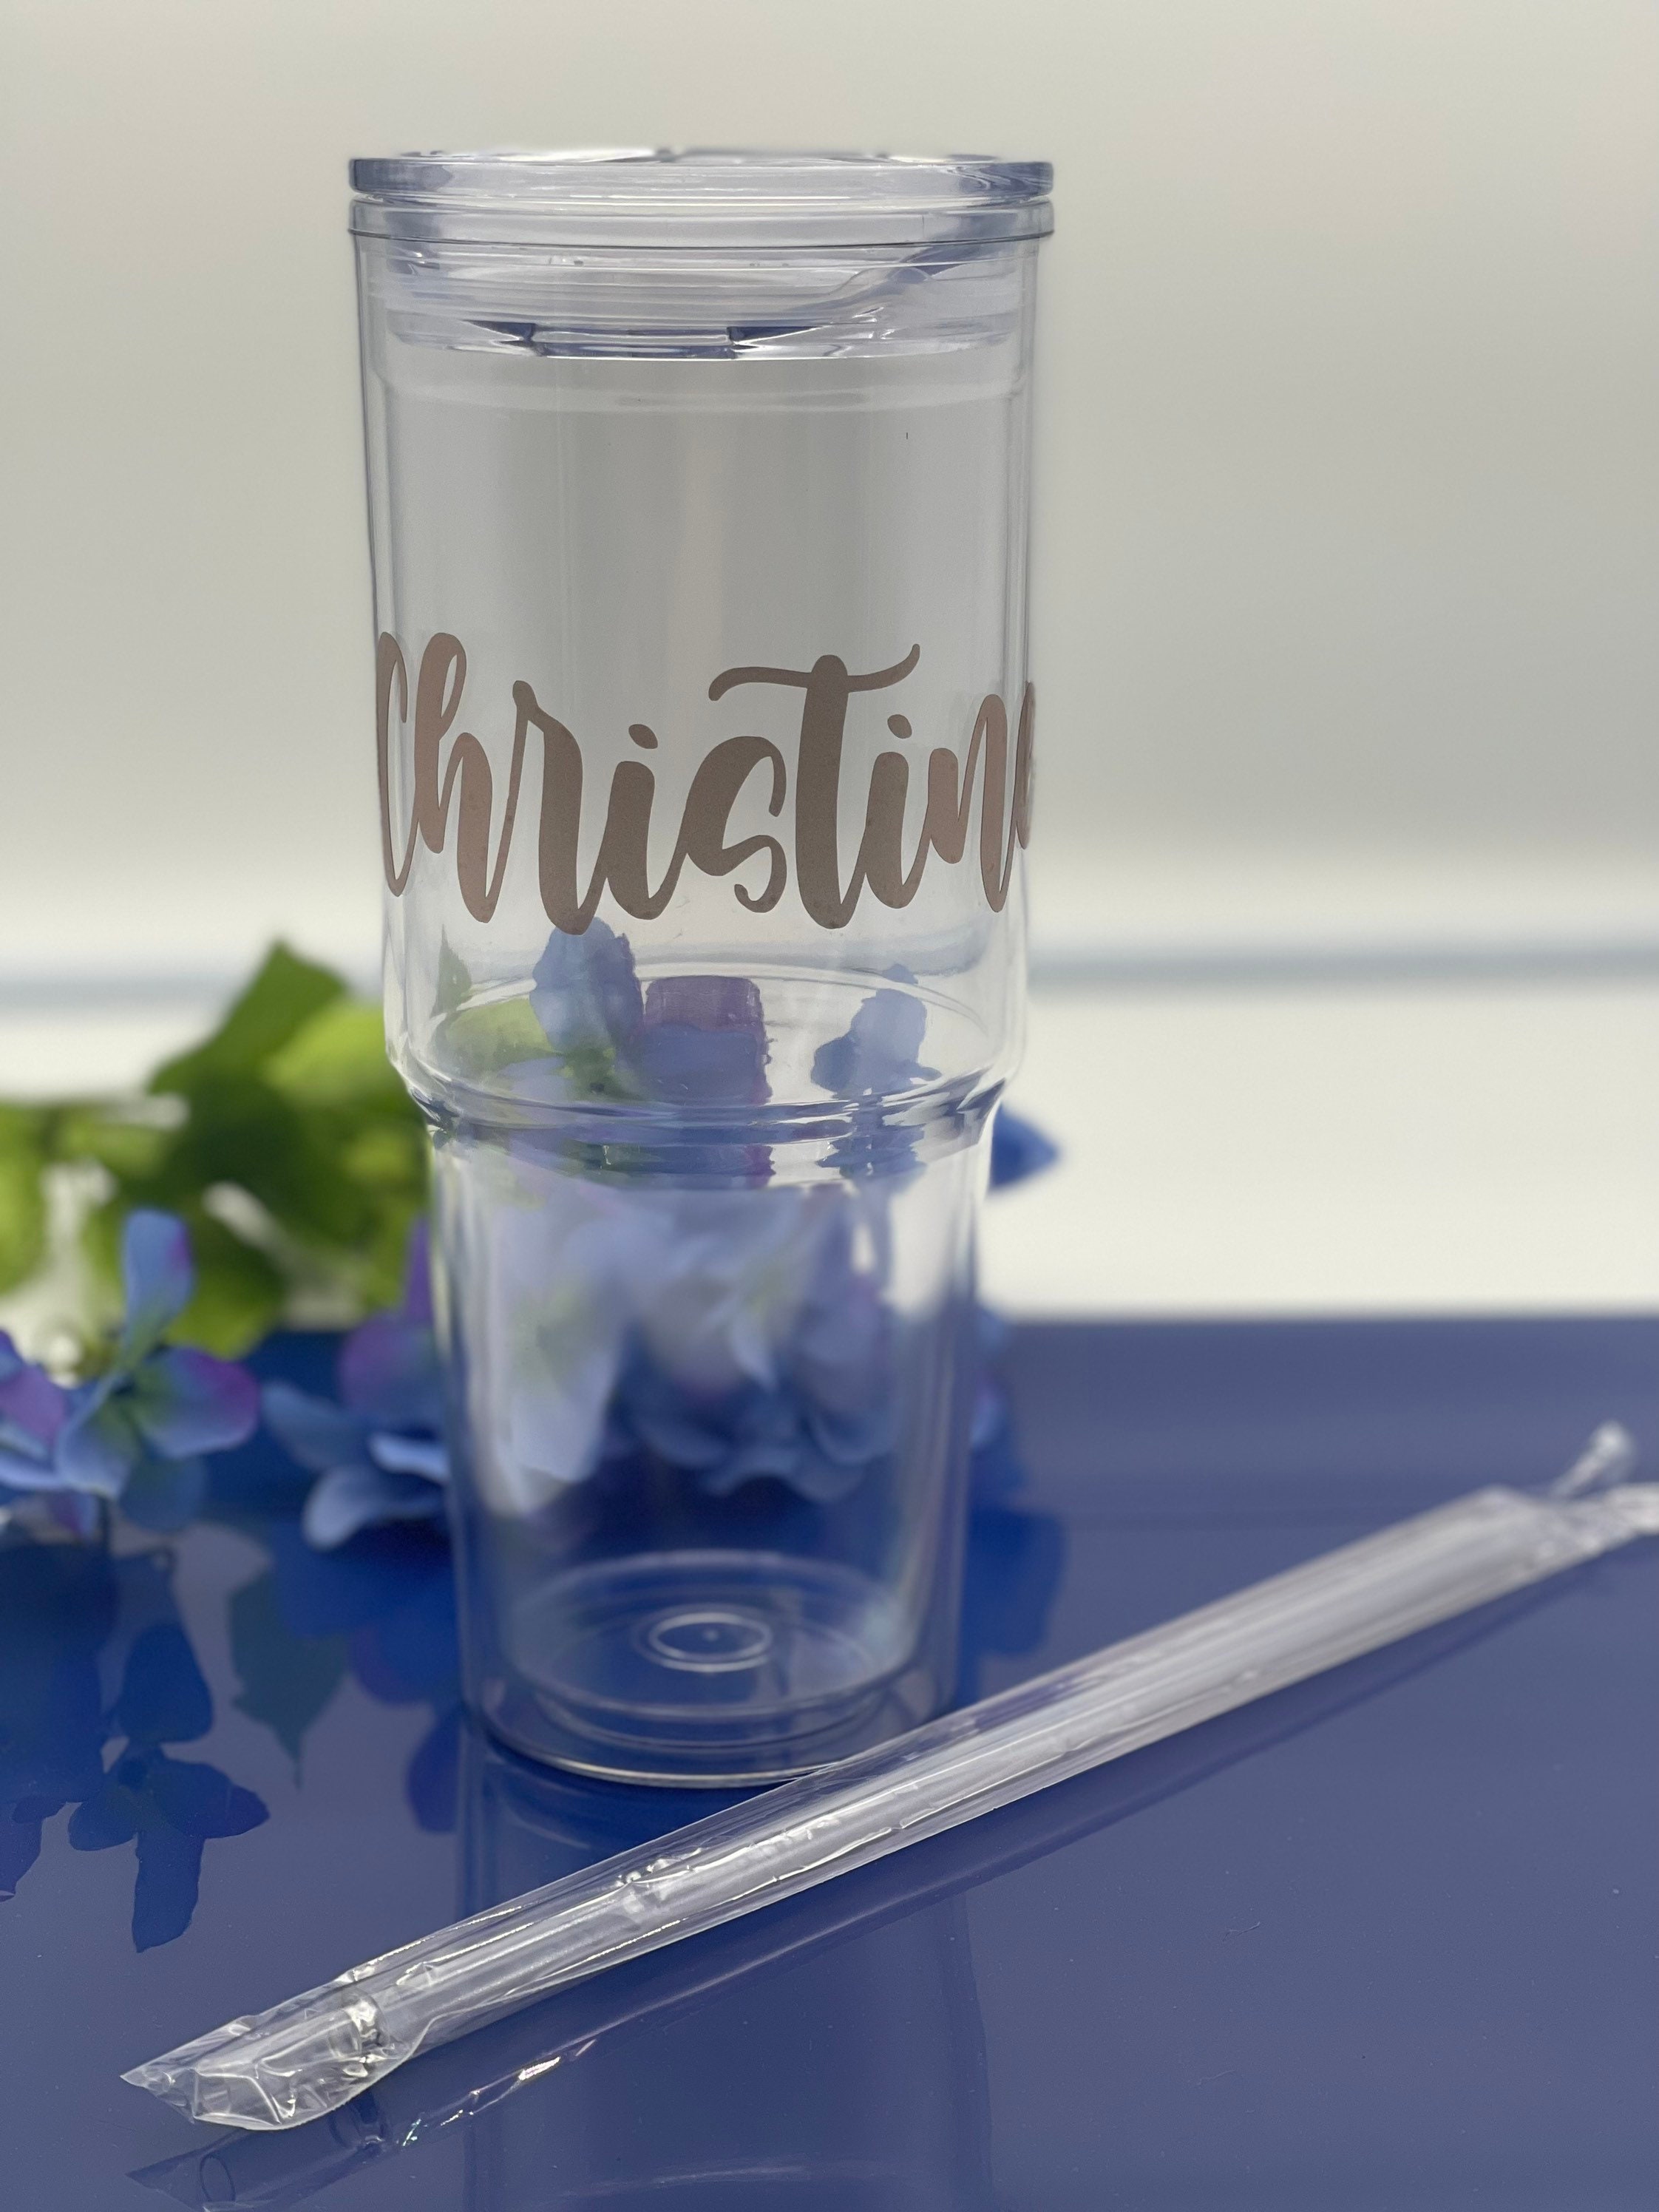 Personalized Name on Clear Acrylic Tumbler with Straw – SheltonShirts